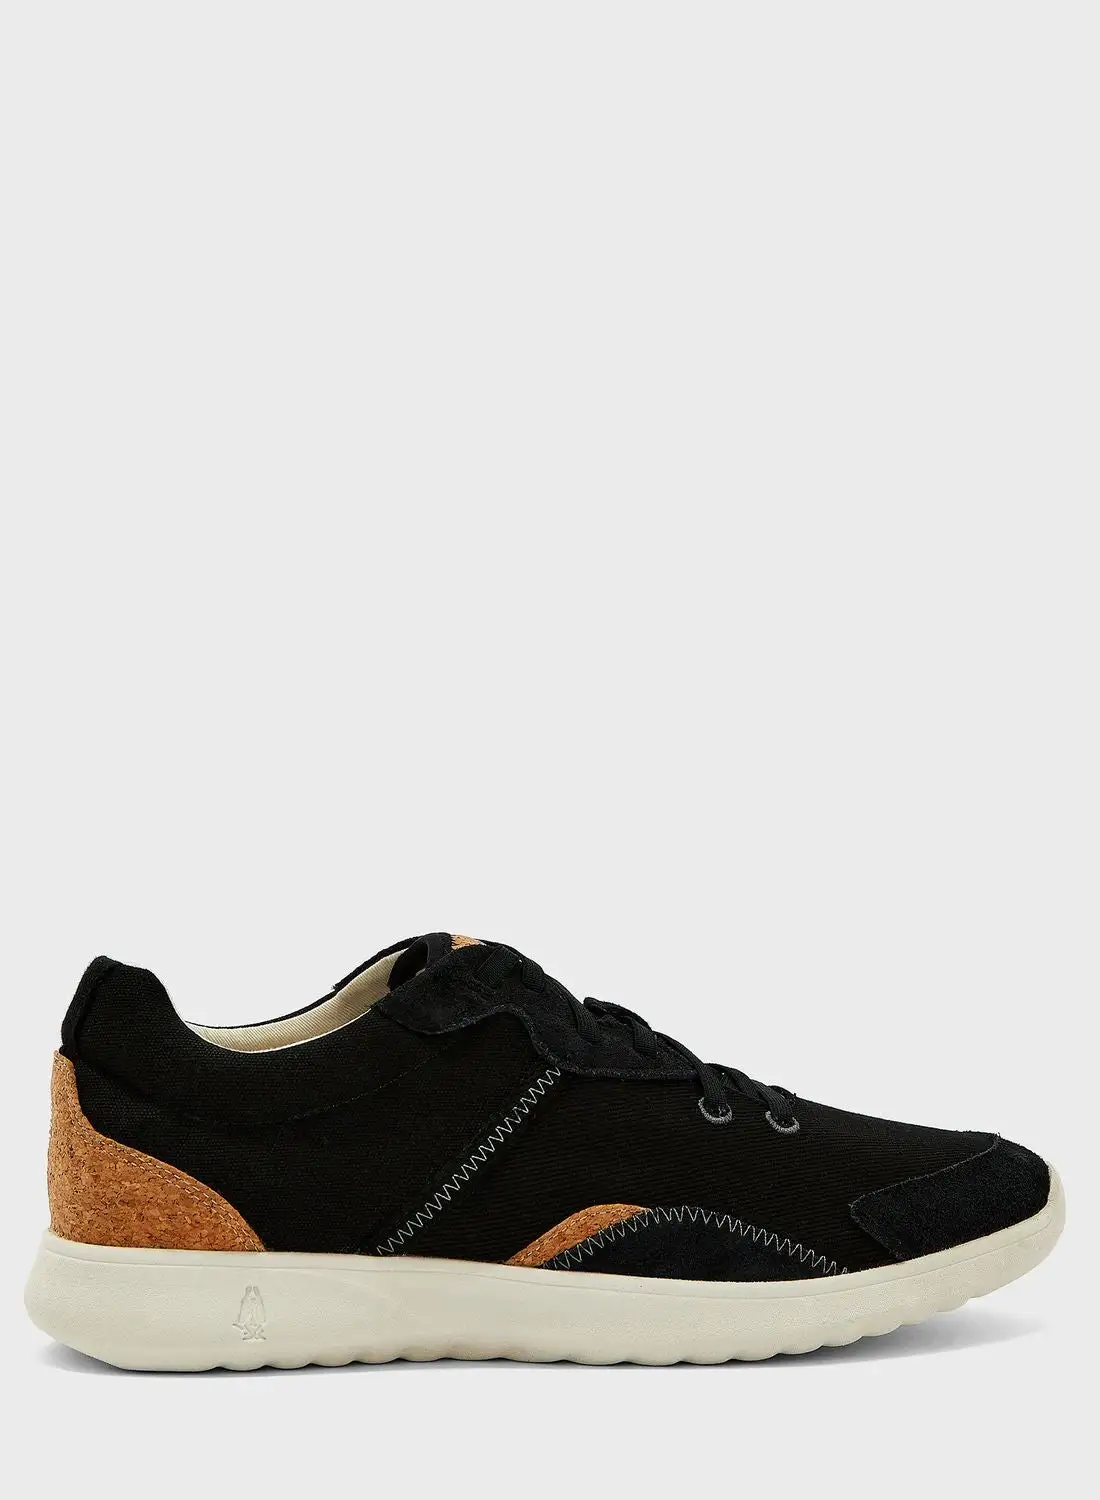 Hush Puppies Casual Low Top Sneakers